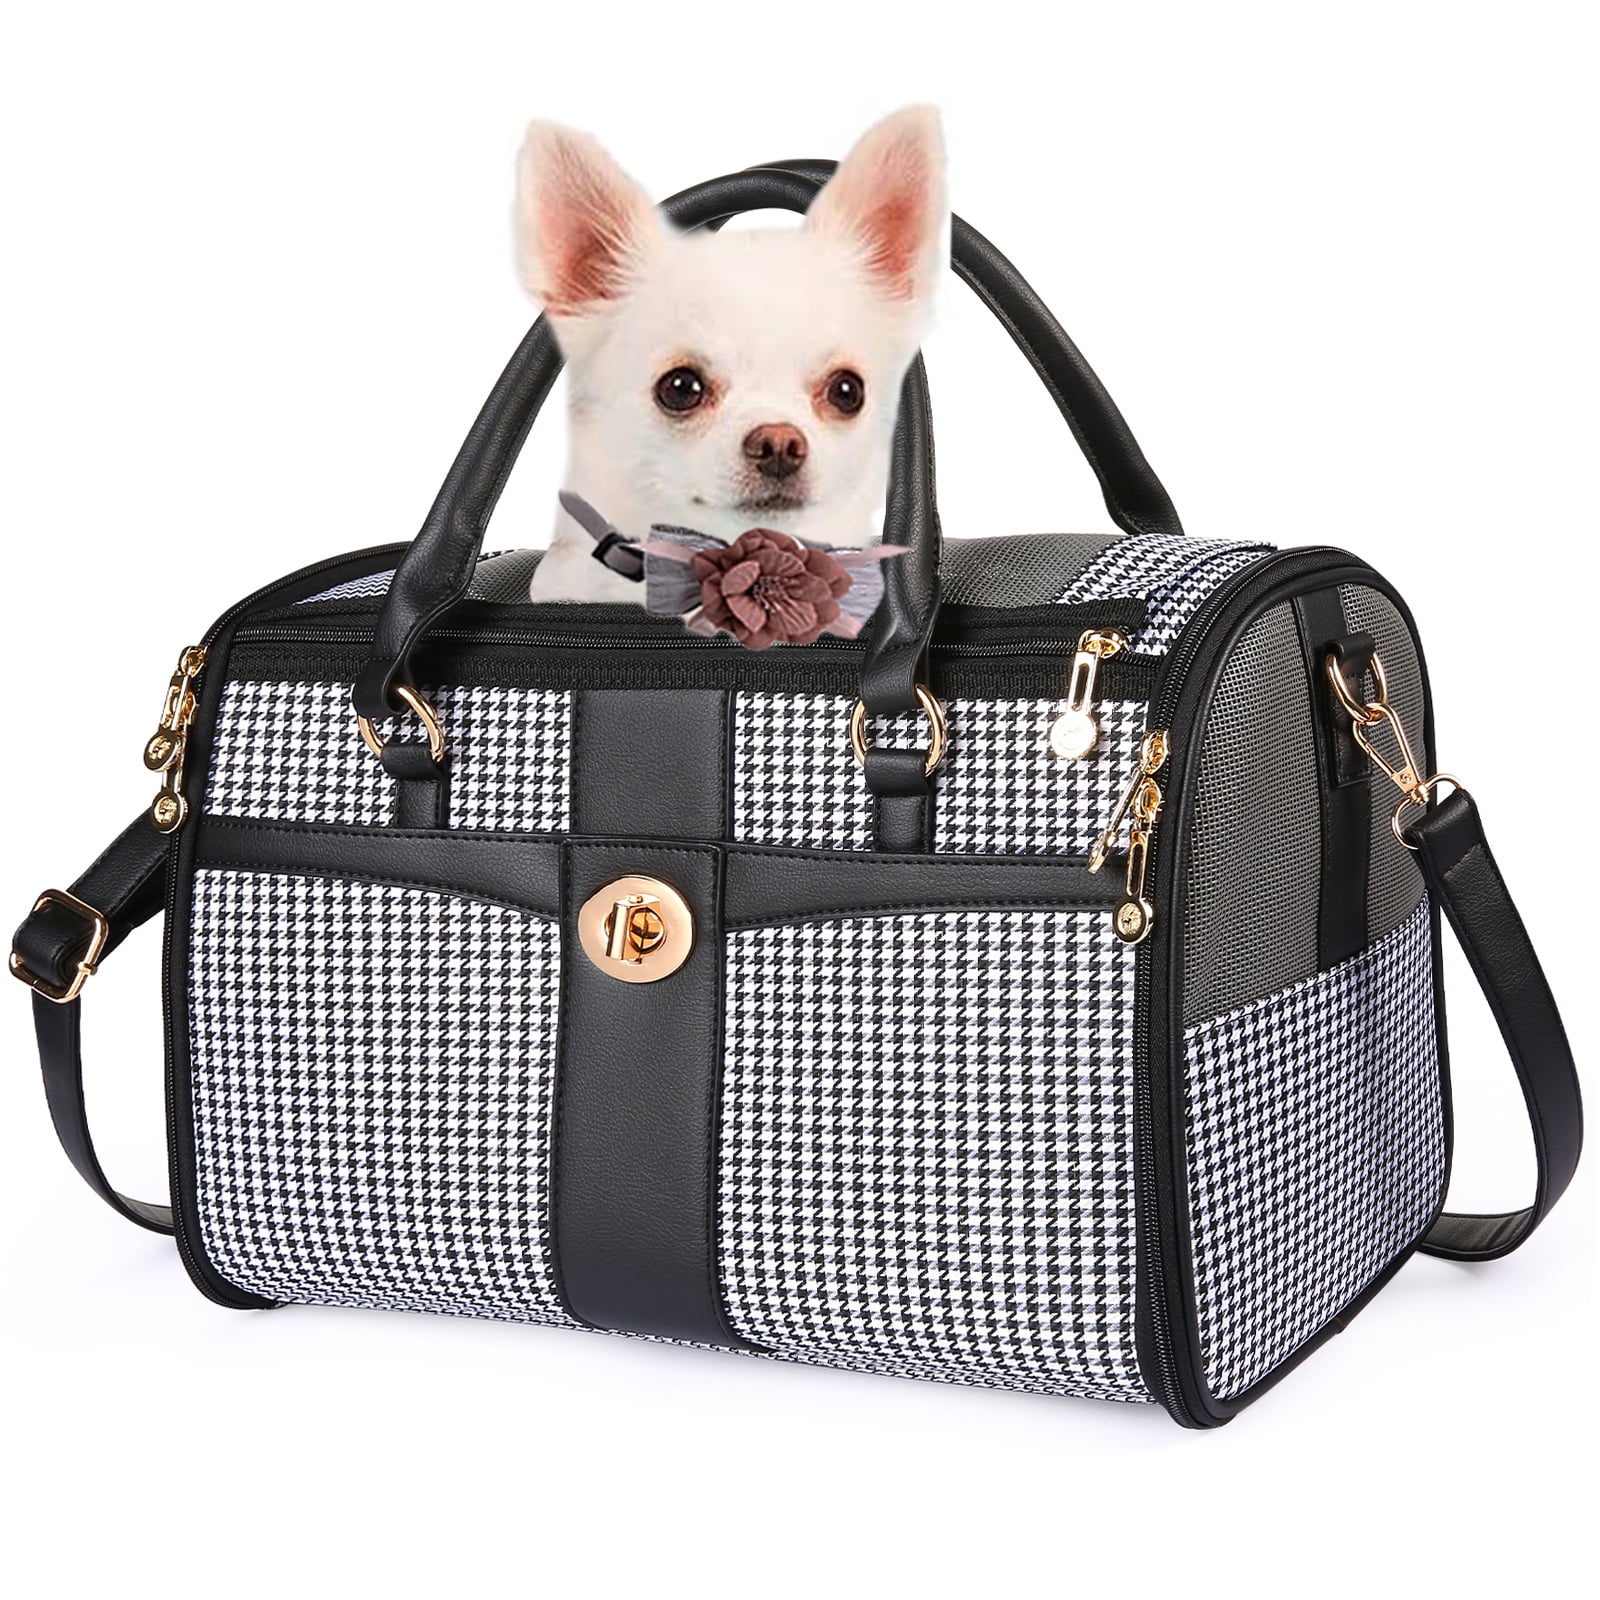 Fashion Dog Purse Carrier for Small Dogs with Extra Large Pocket, Holds Up  to 10lbs Woven Cloth Pet Carrier, Cat Carrier, Airline Approved Puppy Purse